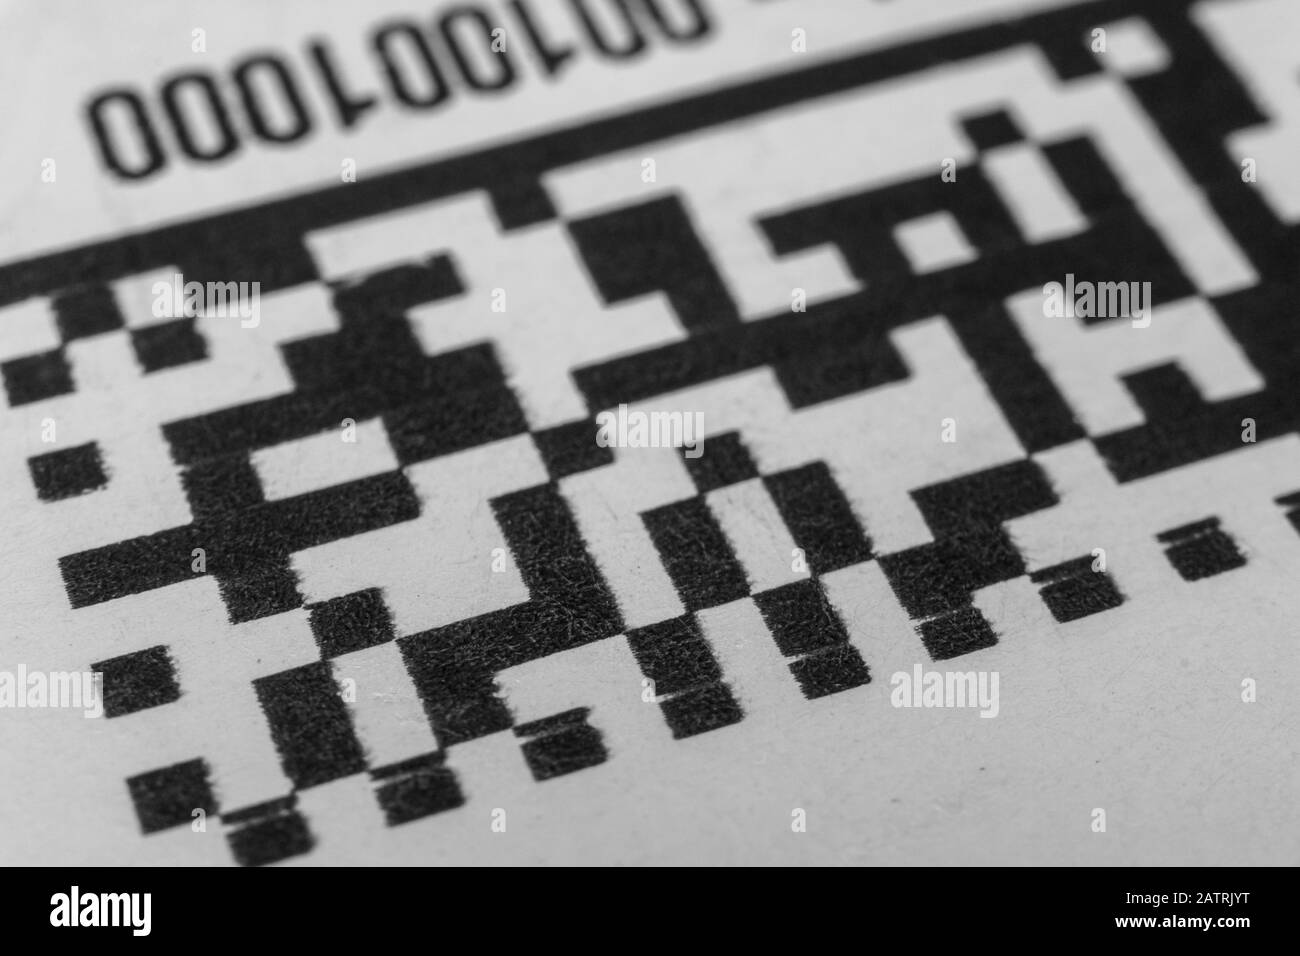 Abstract monochrome close up of isolated printed QR data matrix bar code on white paper label background from material inventory tracking system Stock Photo